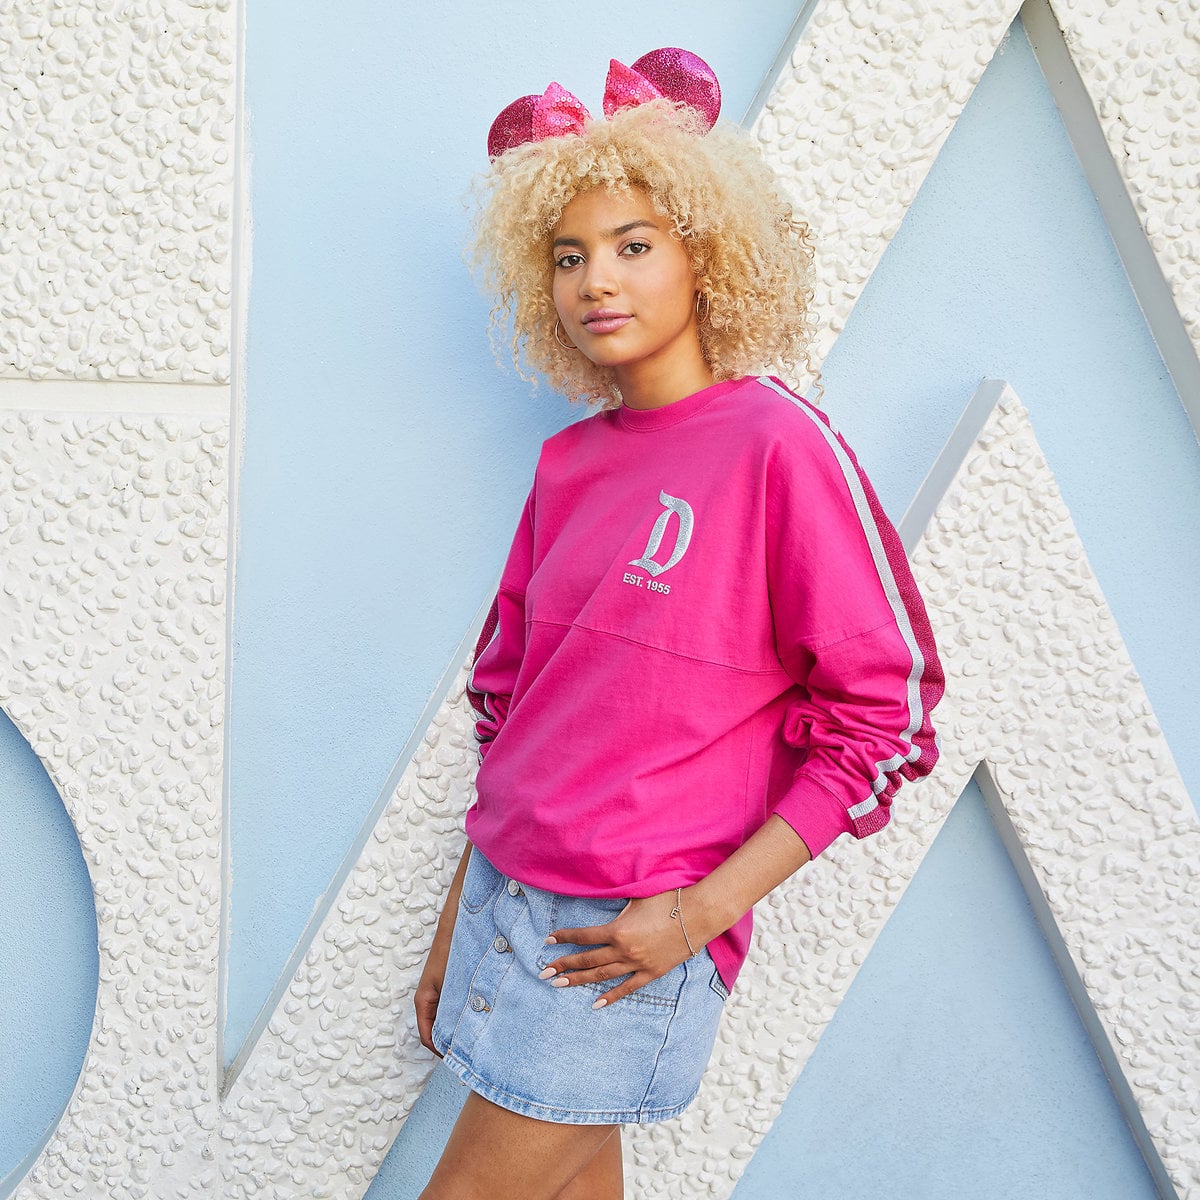 Imagination Pink And Magic Mirror Merchandise Has Arrived